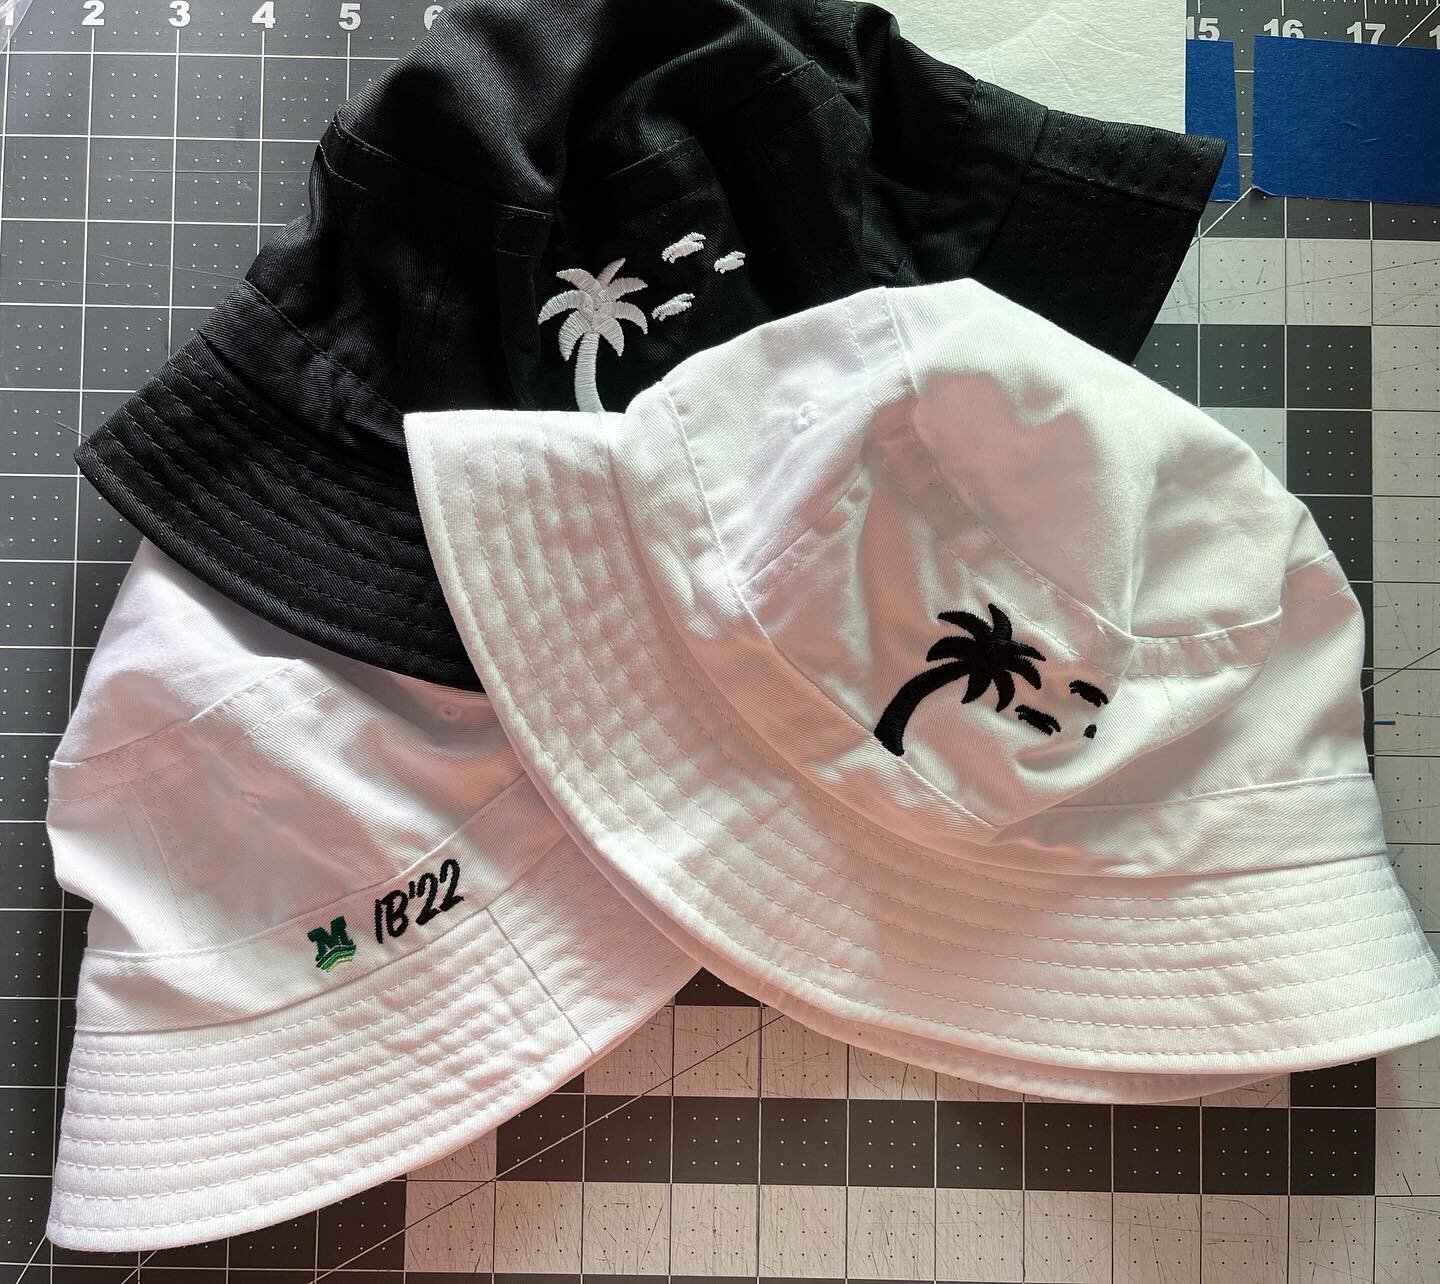 Some MPI co/2022 bucket hats! The final vs the student concept. #embroidery #co2022 #mpi